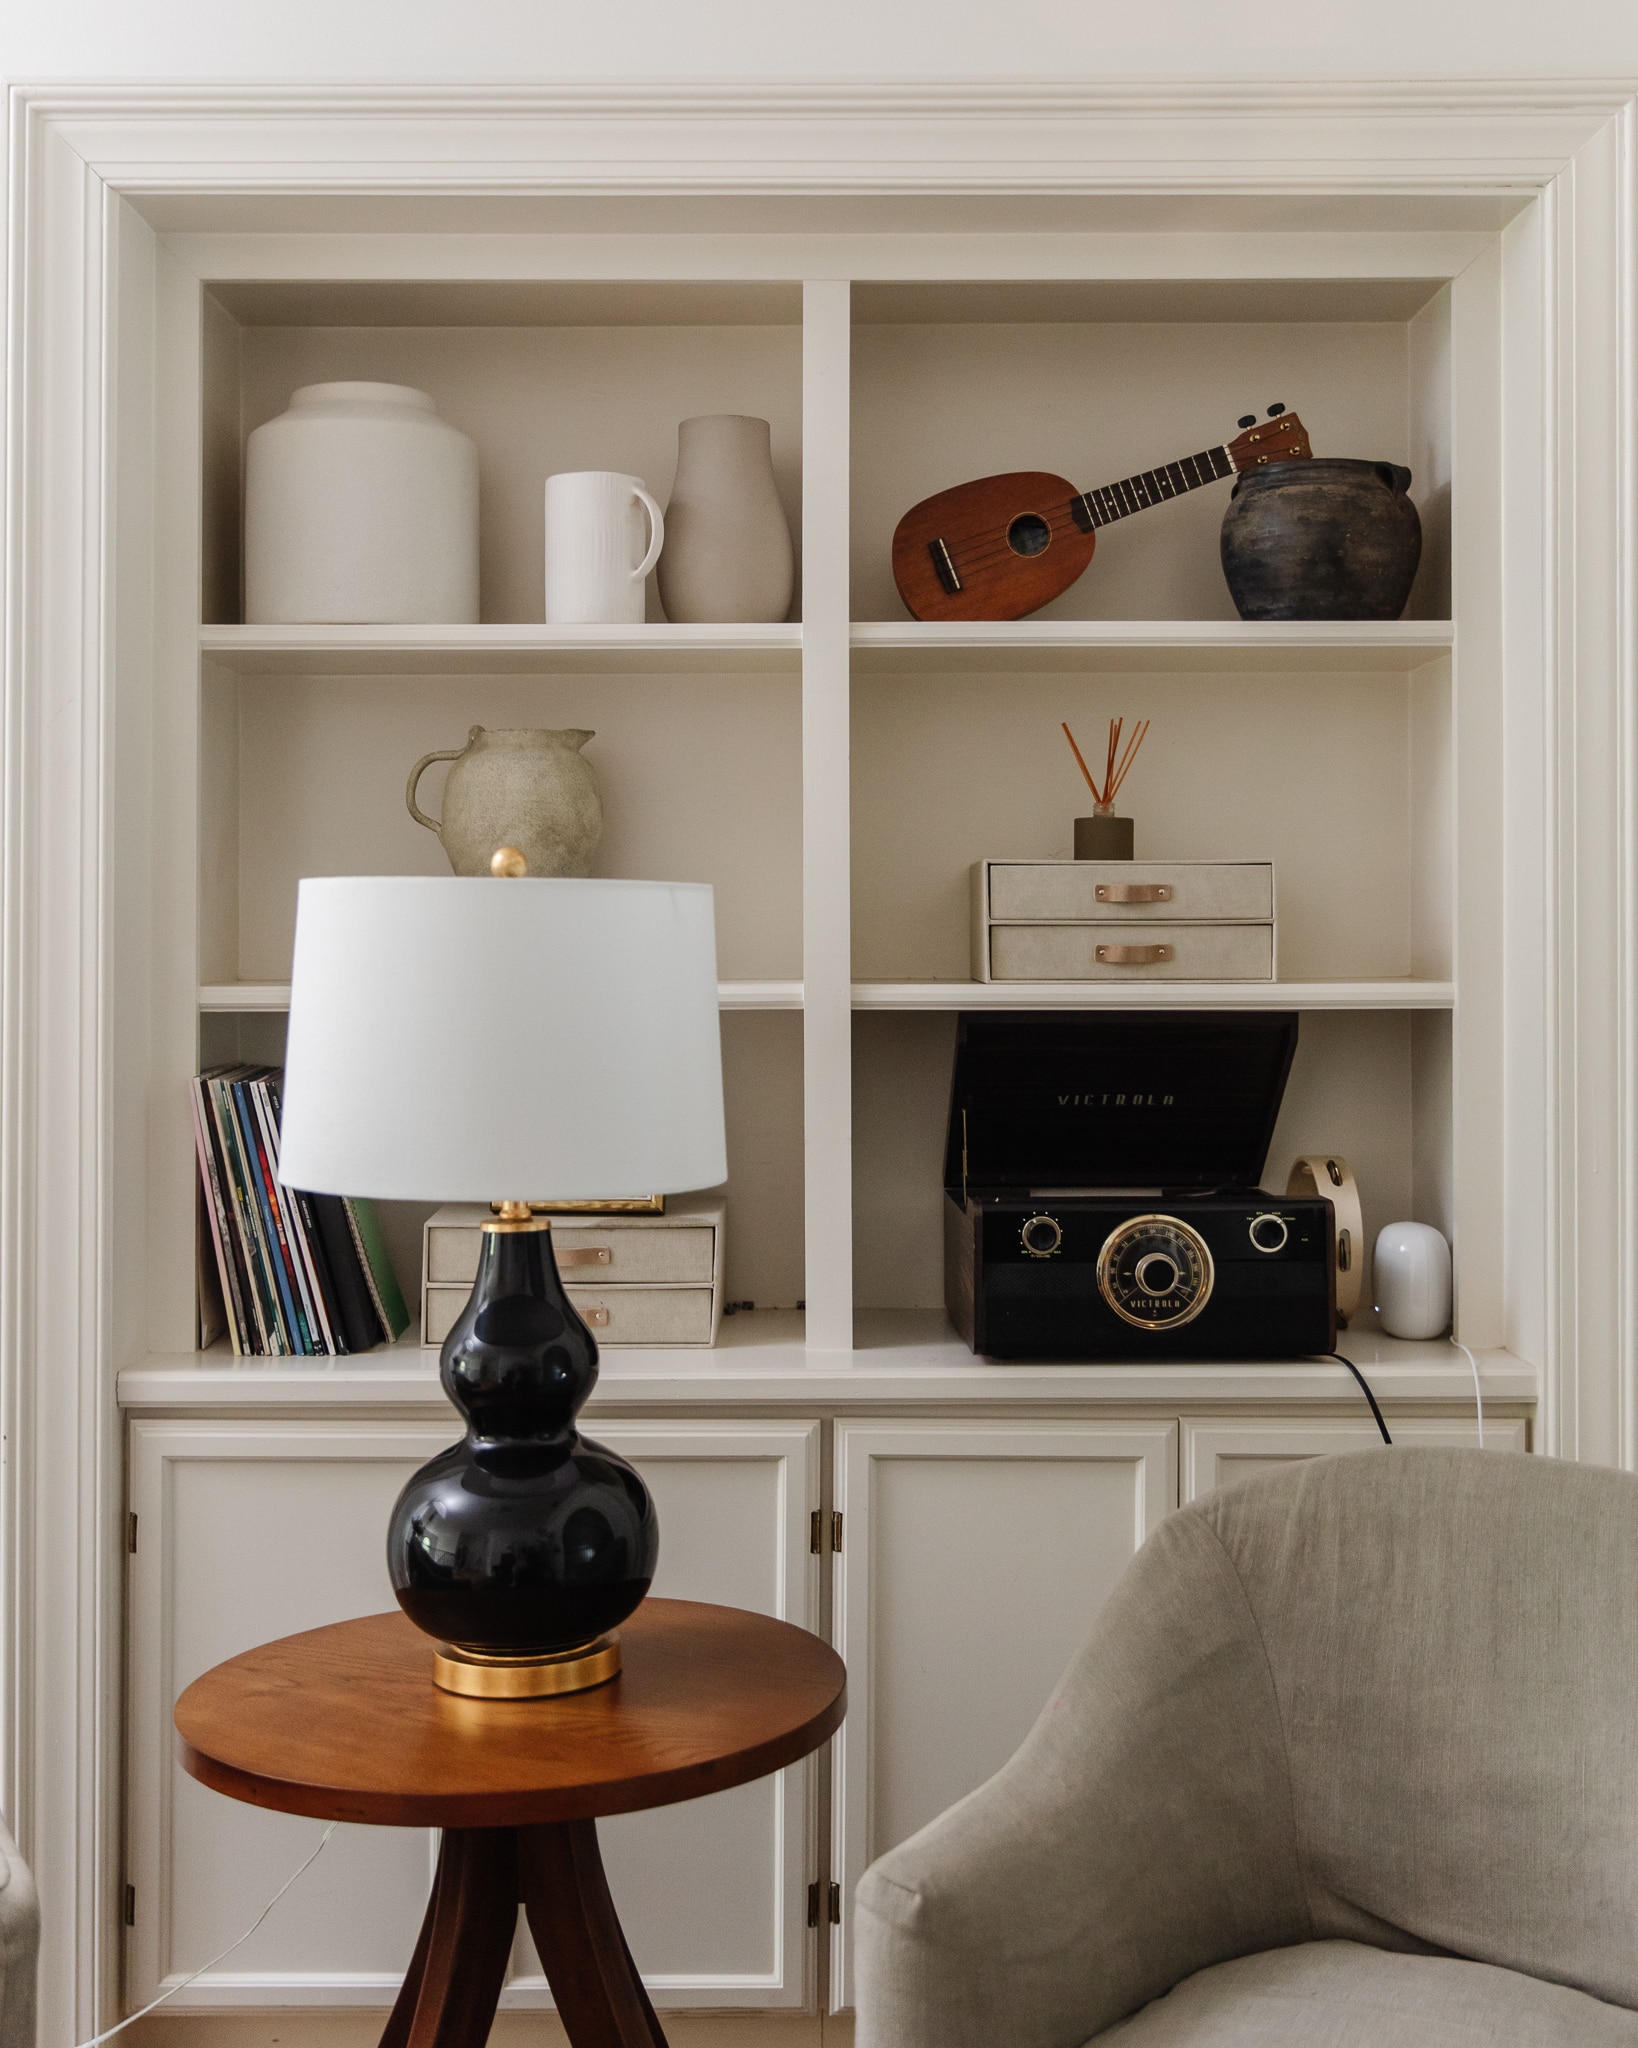 Chris Loves Julia | Upstairs landing with black lamp, turntable and styled shelves